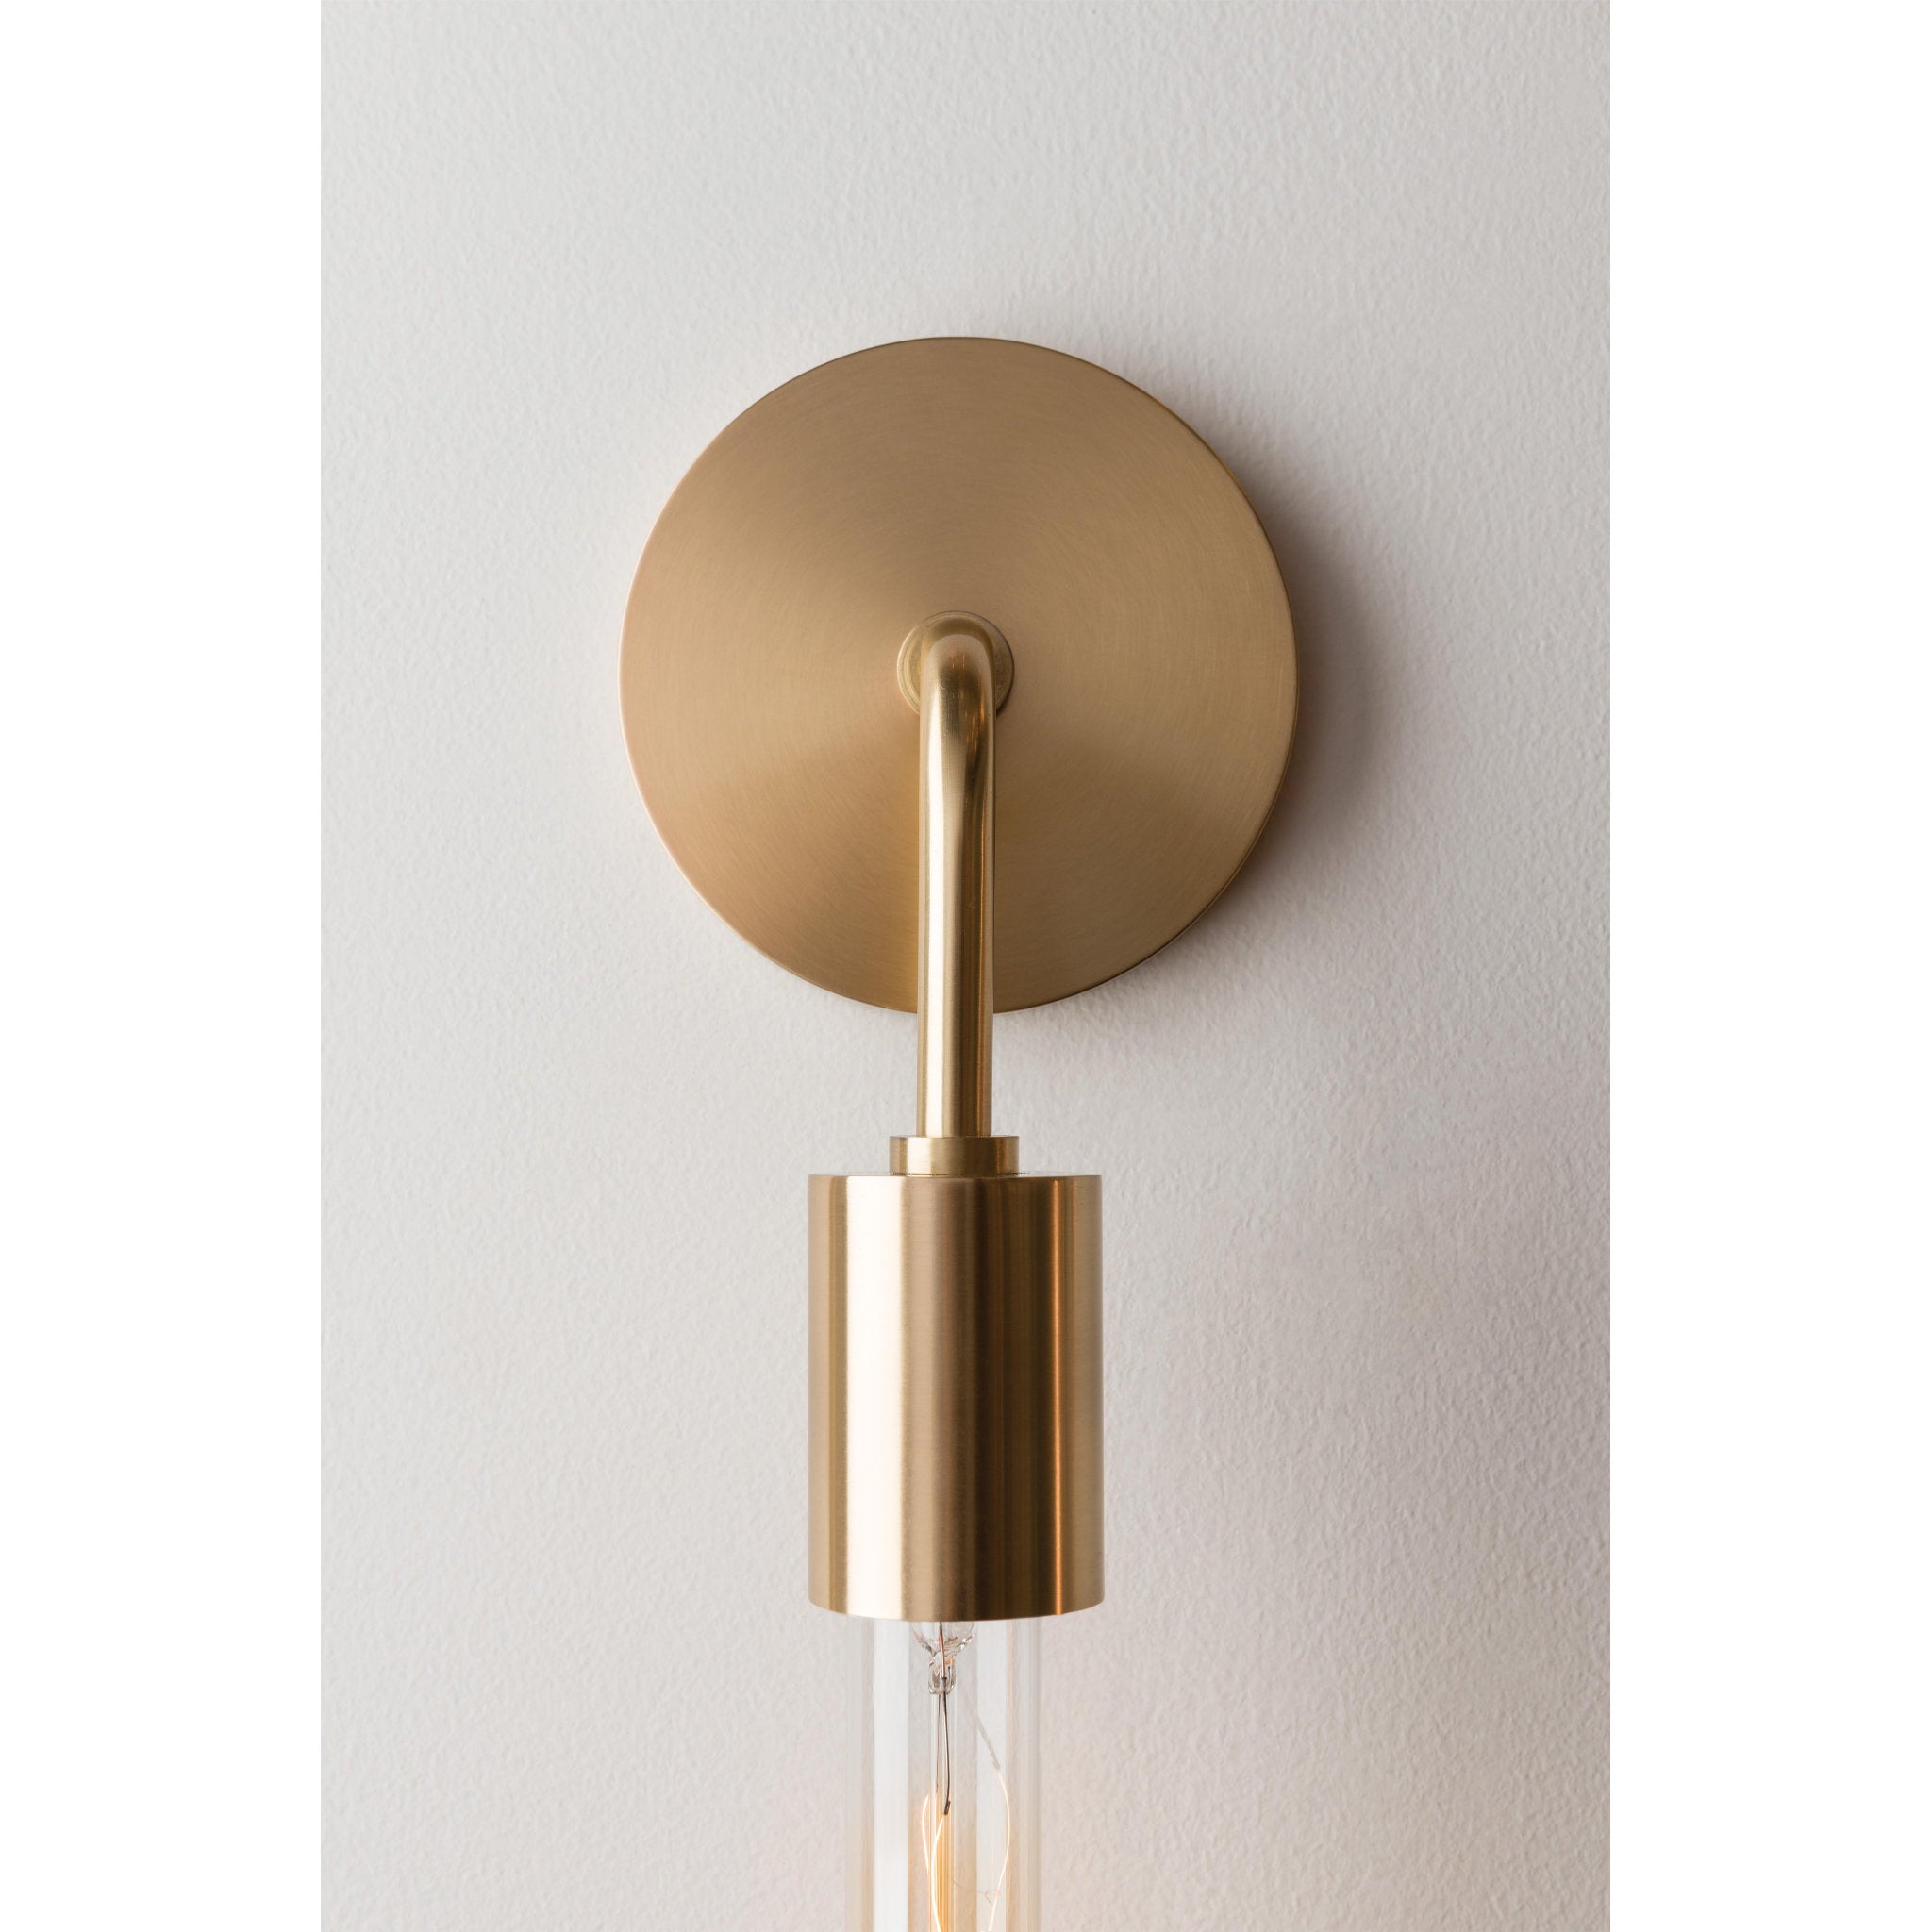 Ava 1-Light Wall Sconce in Old Bronze